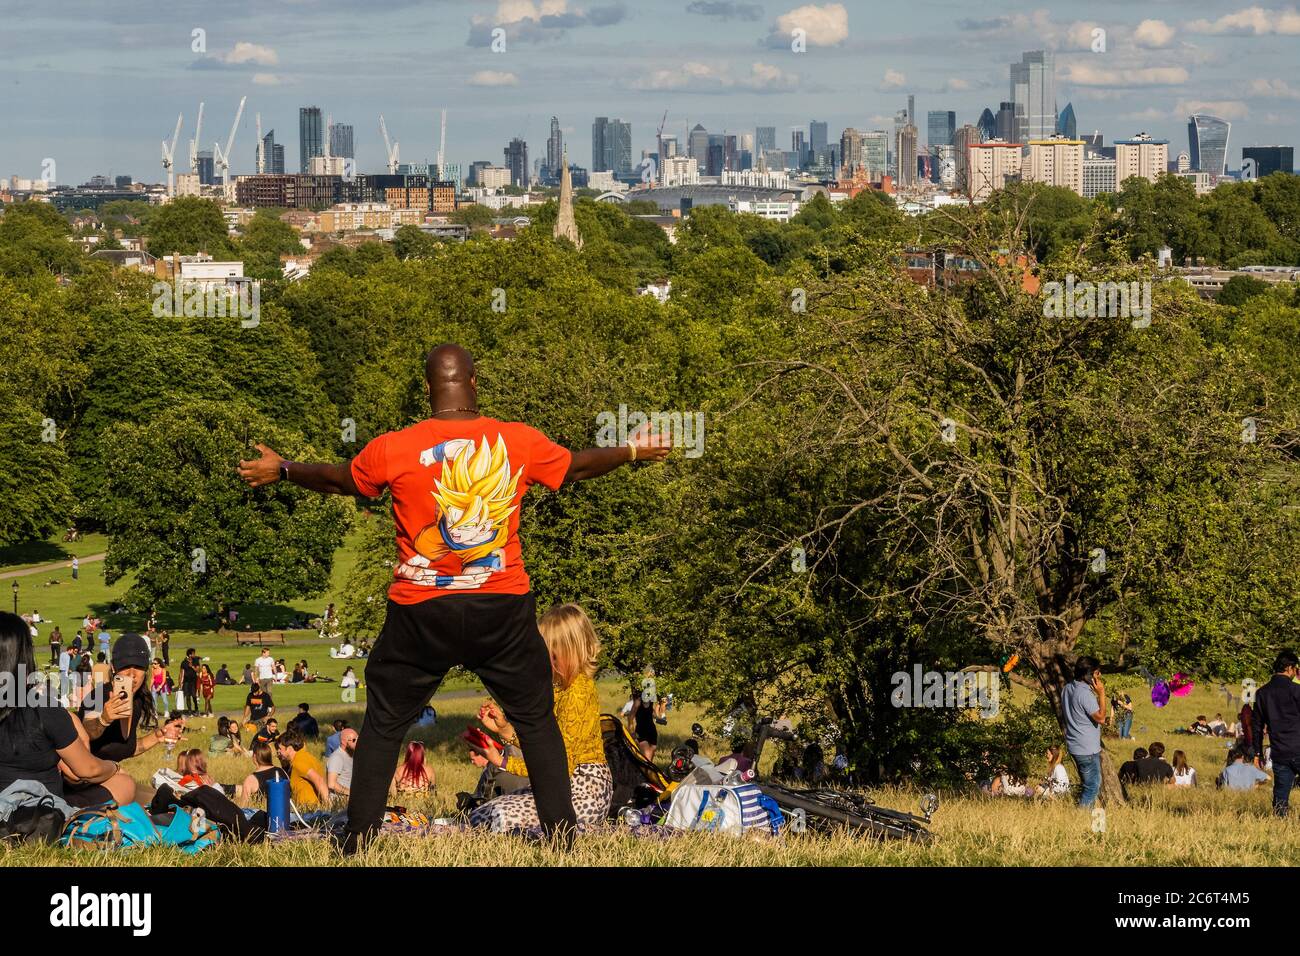 London, UK. 11th July, 2020. People enjoy a sunny evening on Primrose Hill overlooking the city. The 'lockdown' continues to be eased for the Coronavirus (Covid 19) outbreak in London. Credit: Guy Bell/Alamy Live News Stock Photo